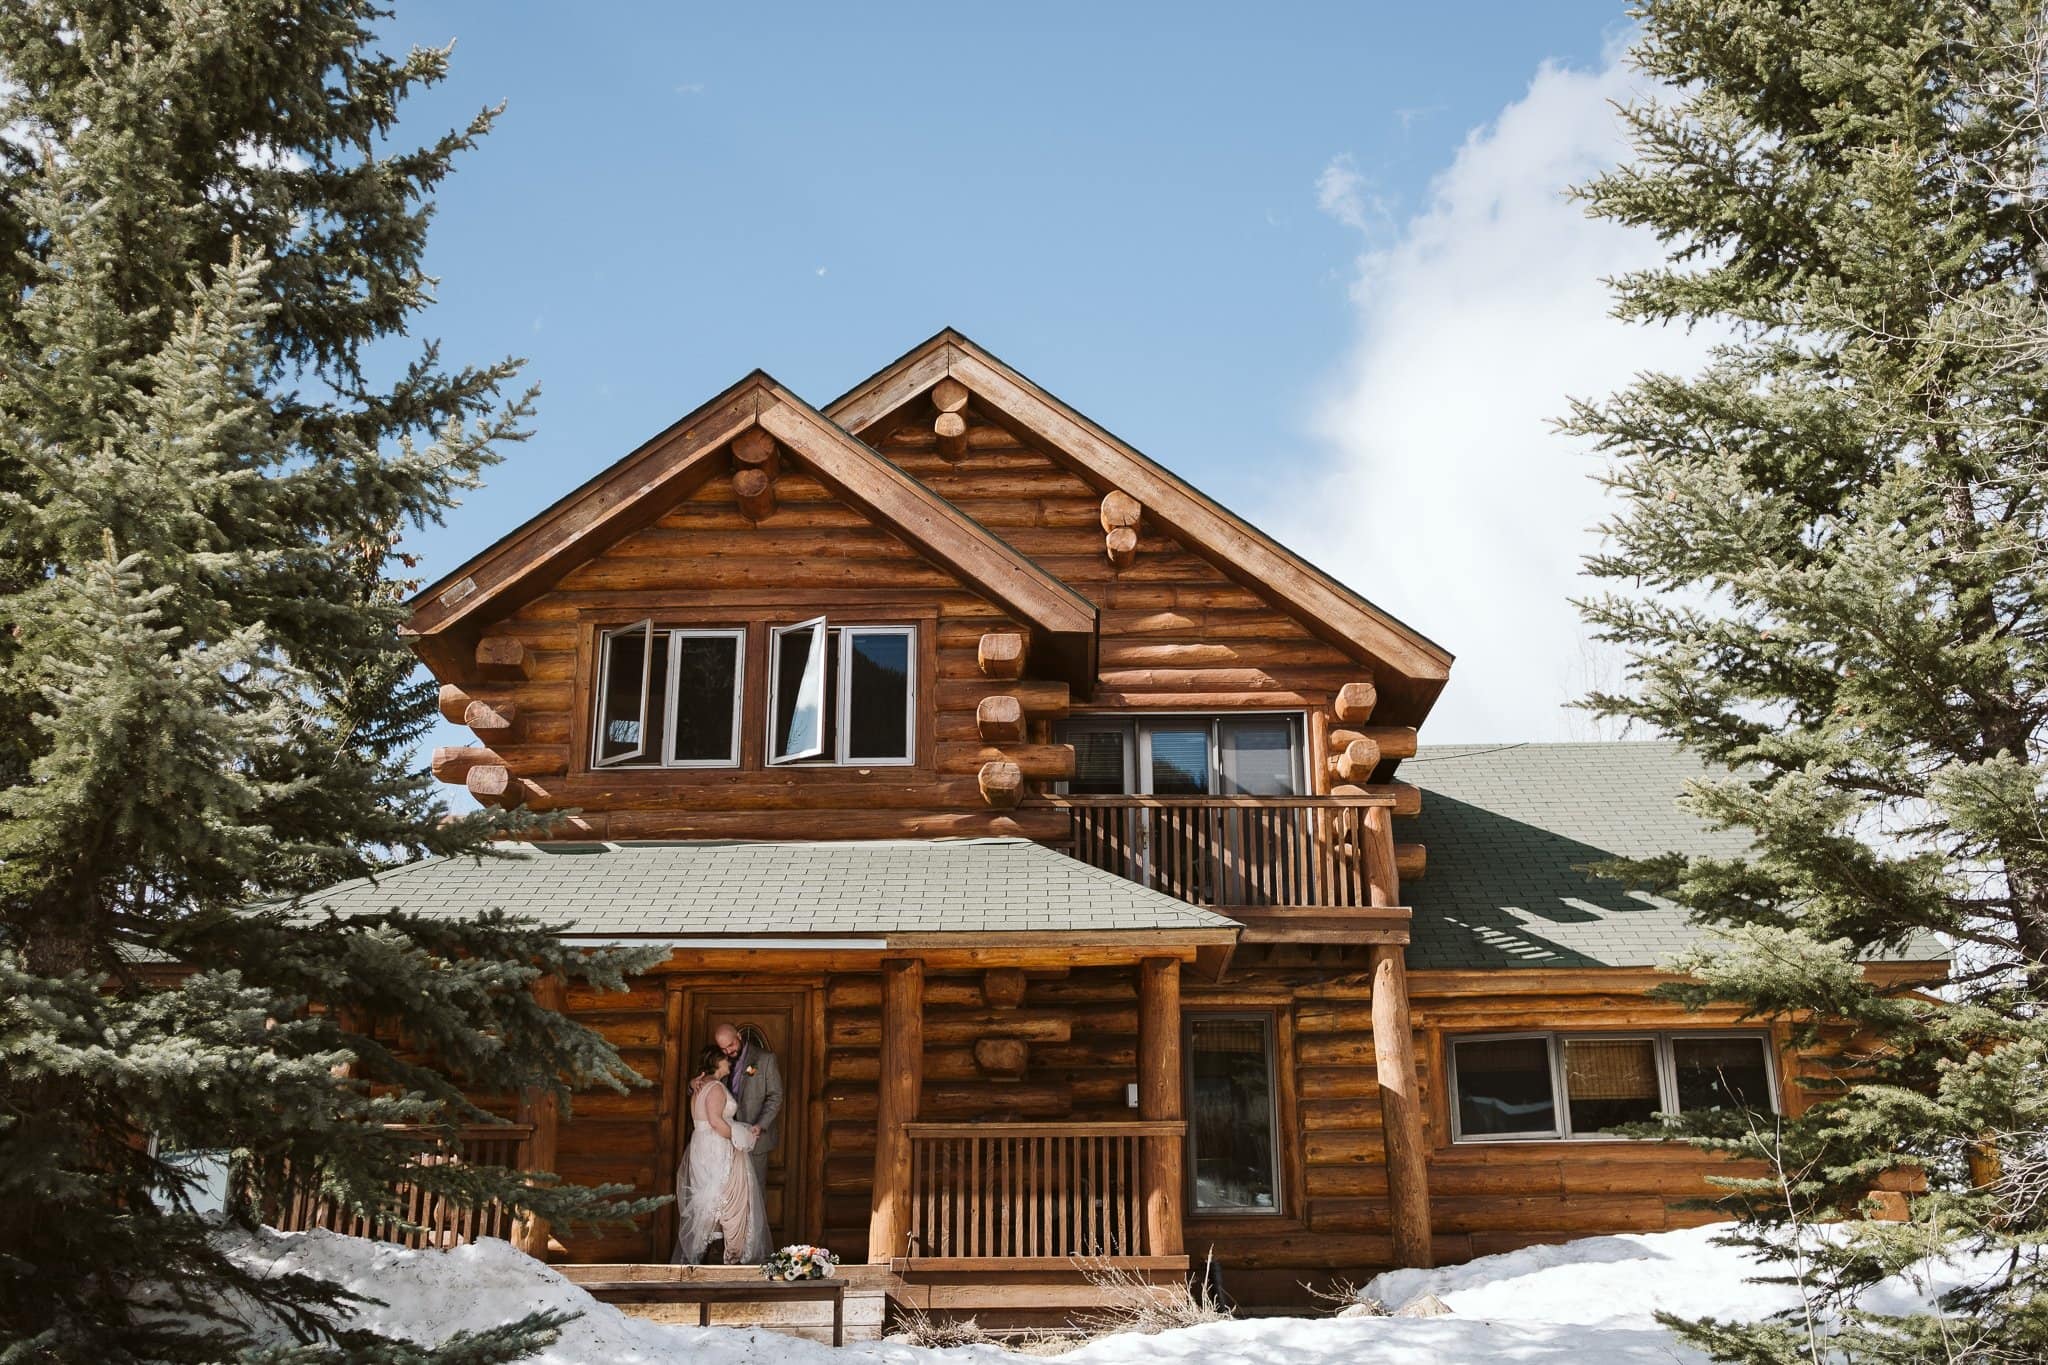 Best Vacation Rentals in Crested Butte